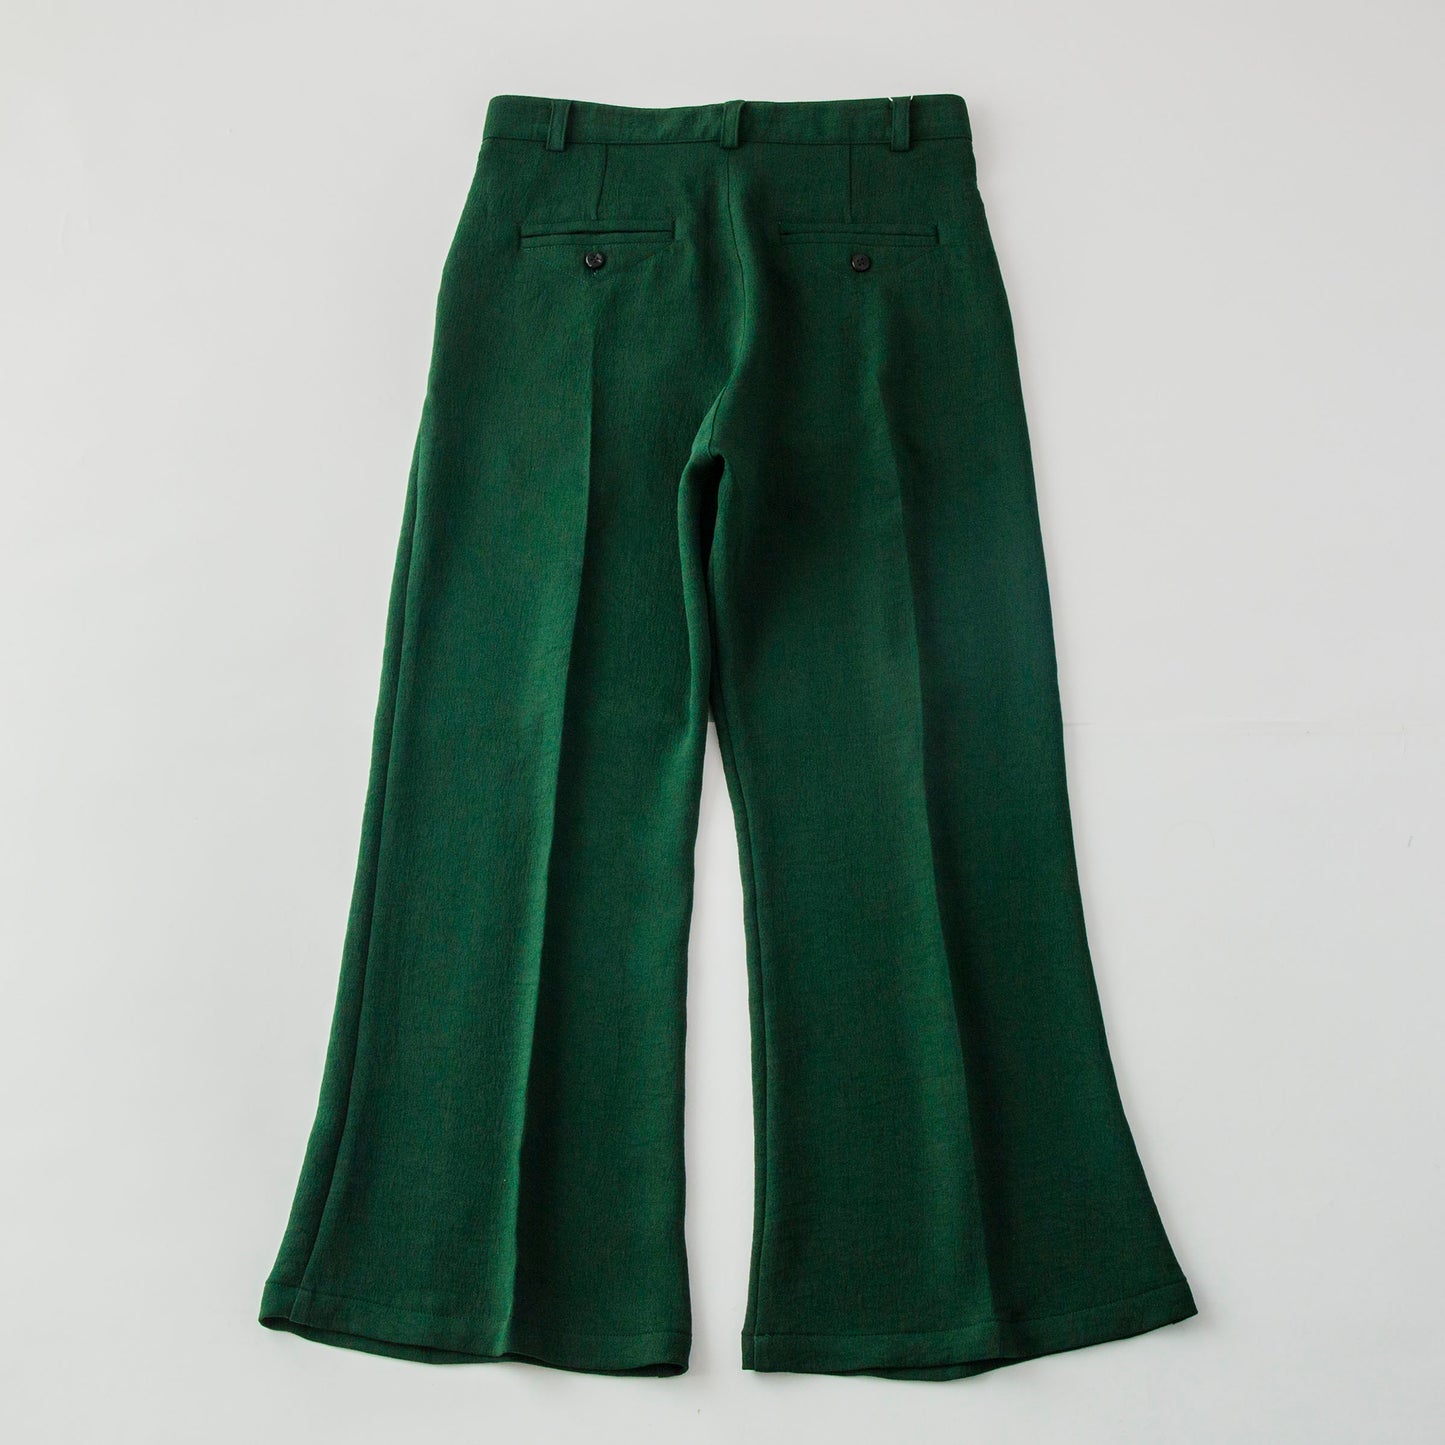 Crepe Georgette Bootcut Trousers